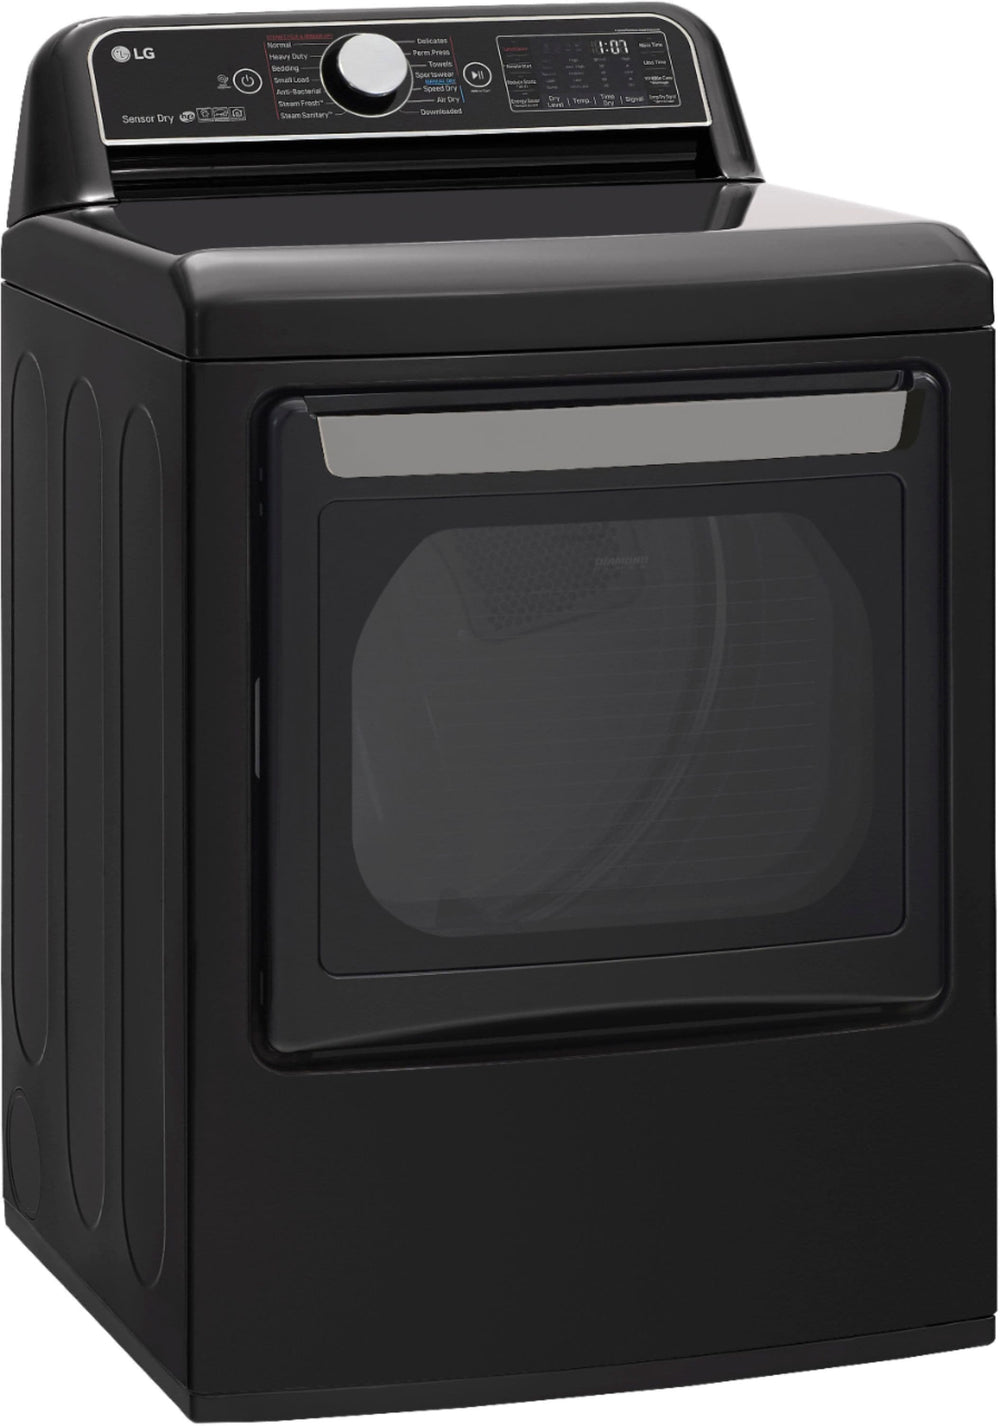 LG - 7.3 Cu. Ft. Smart Electric Dryer with Steam and Sensor Dry - Black steel_1